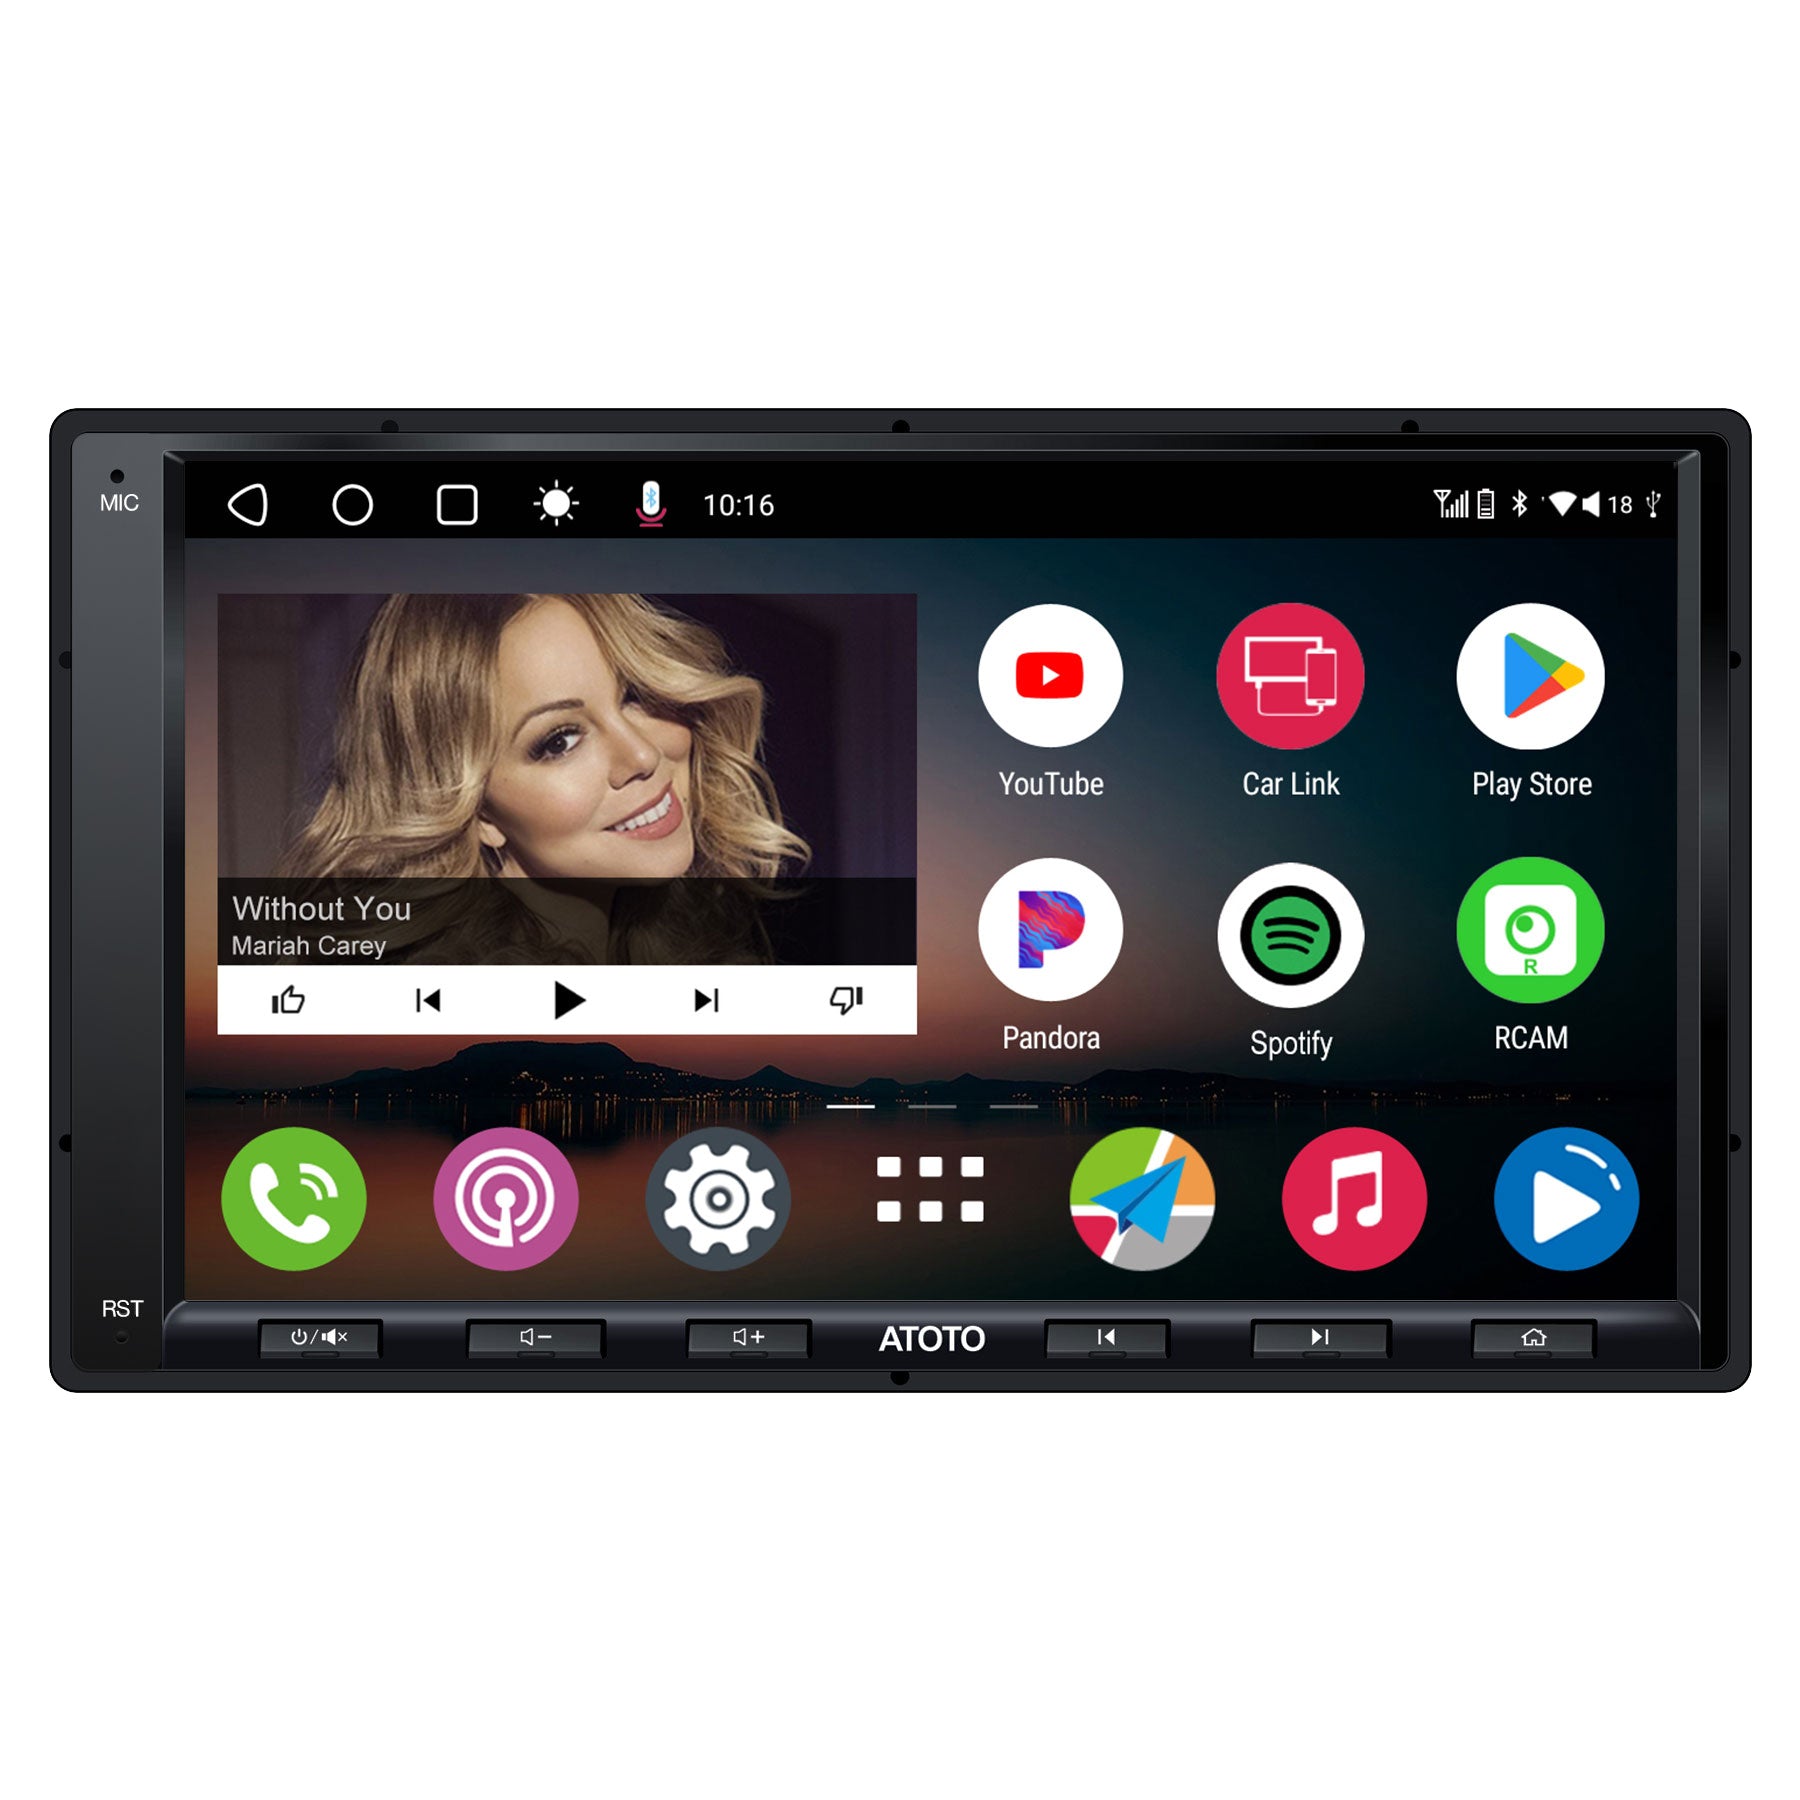 ATOTO A6 Performance DoubleDIN 7 Inch Android Car Stereo (This model